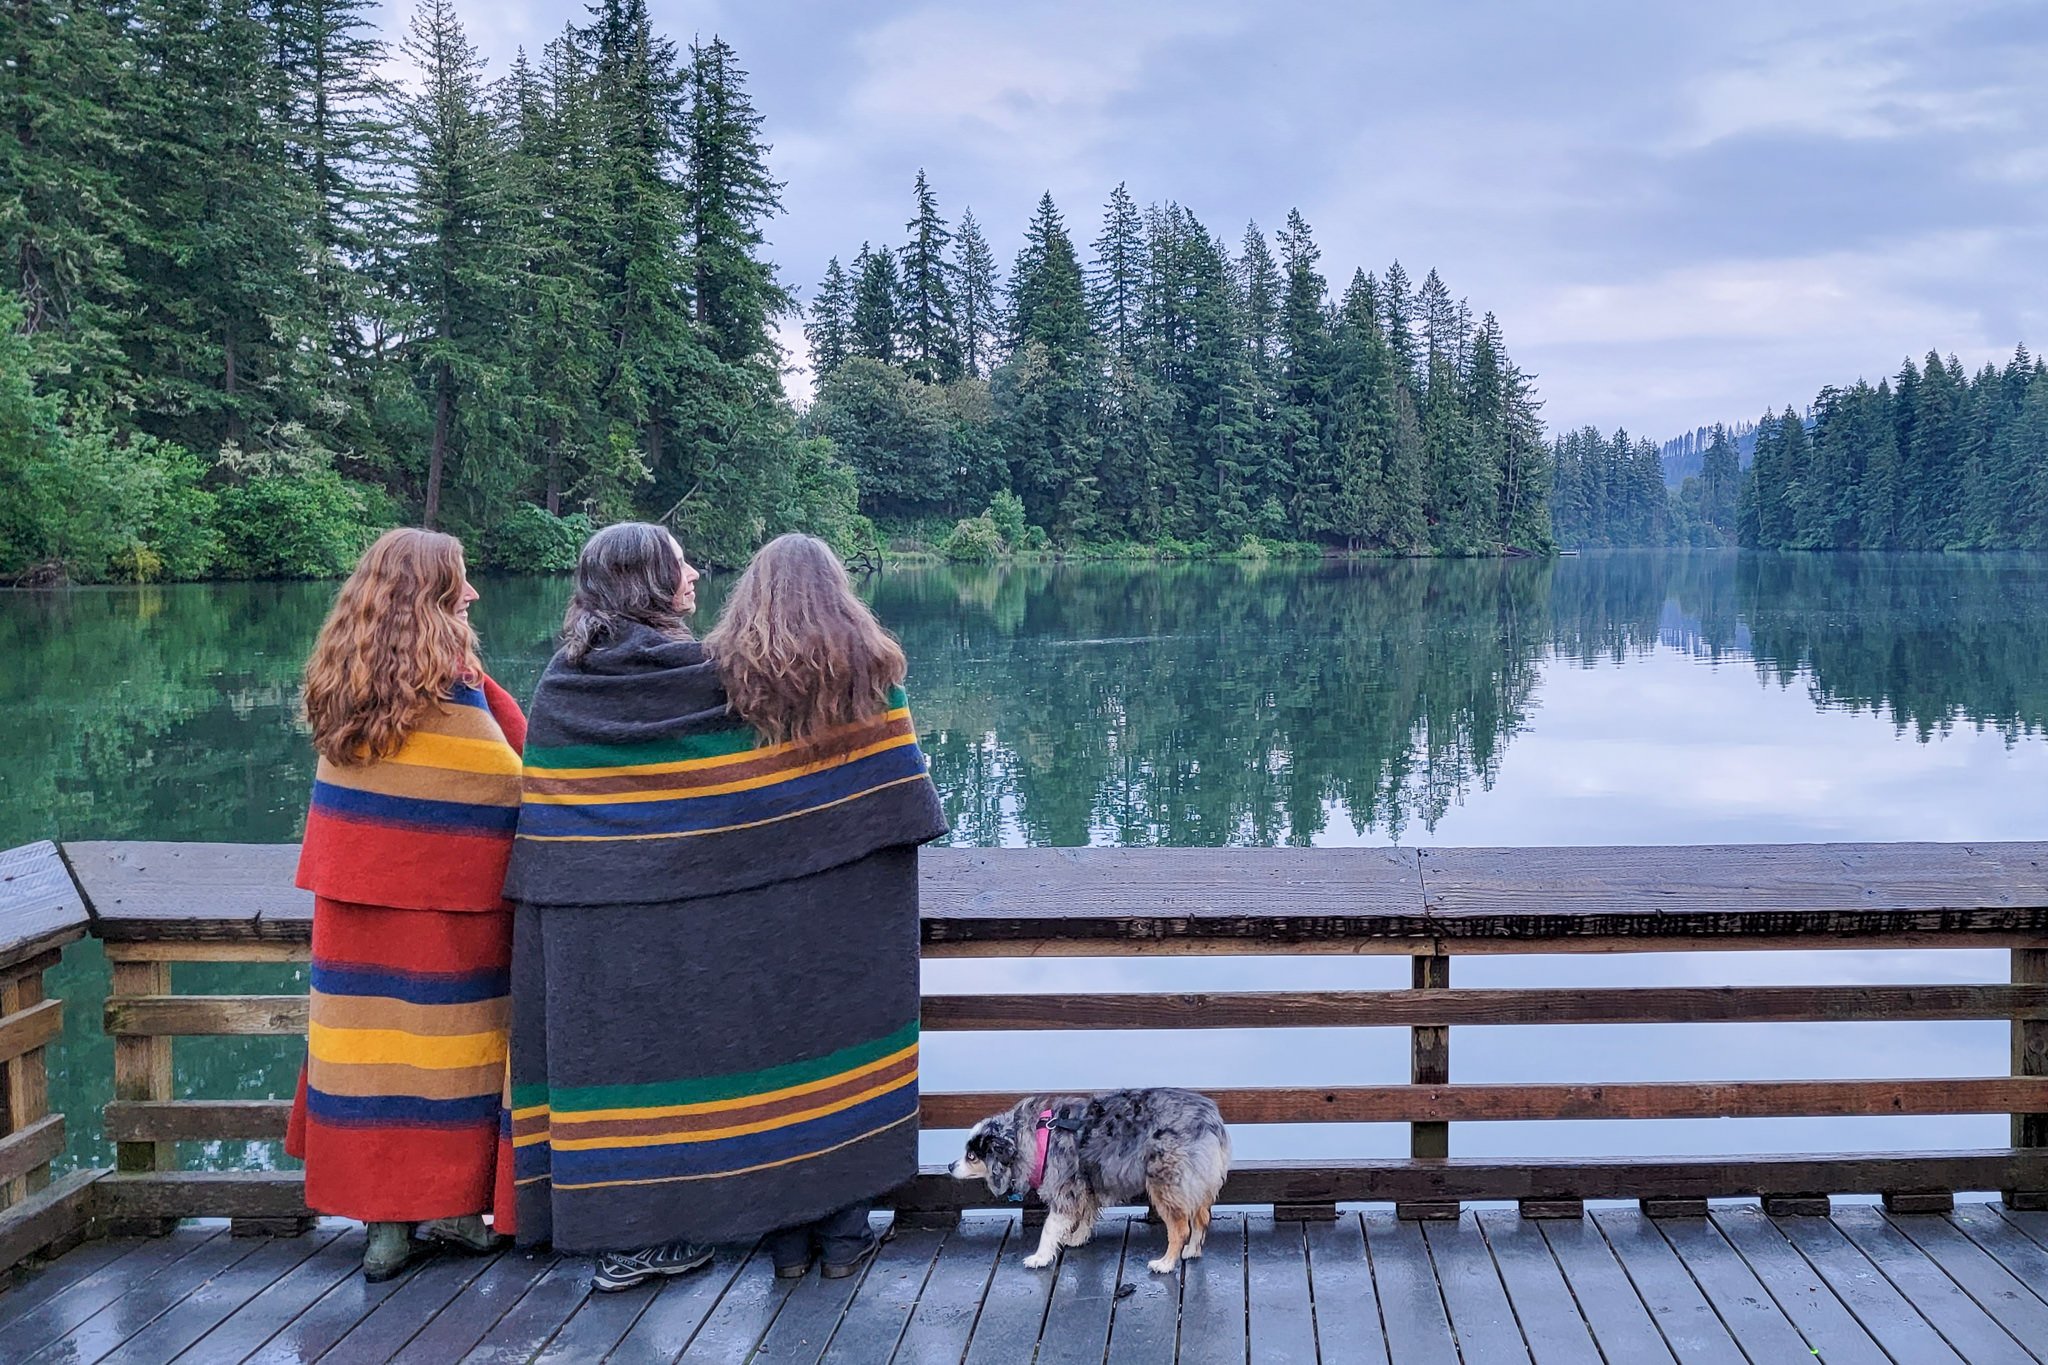 Three women bundled up in the Pendleton Yakima & National Parks Blankets on a dock over a lake